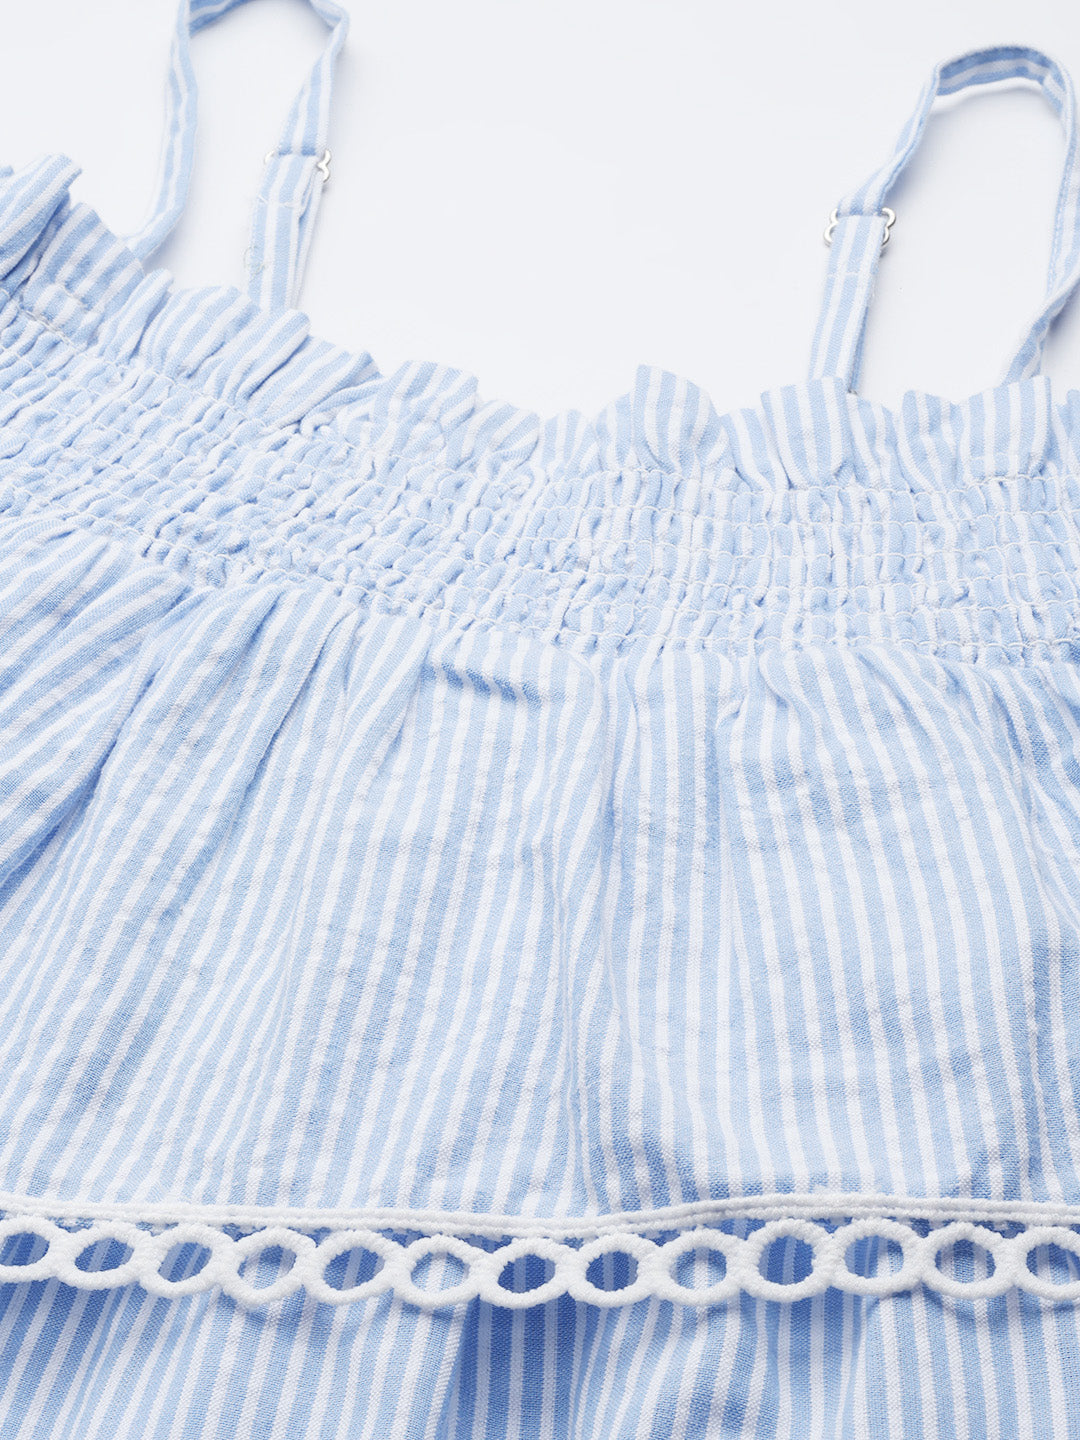 Buy Two Dresses Blue And White